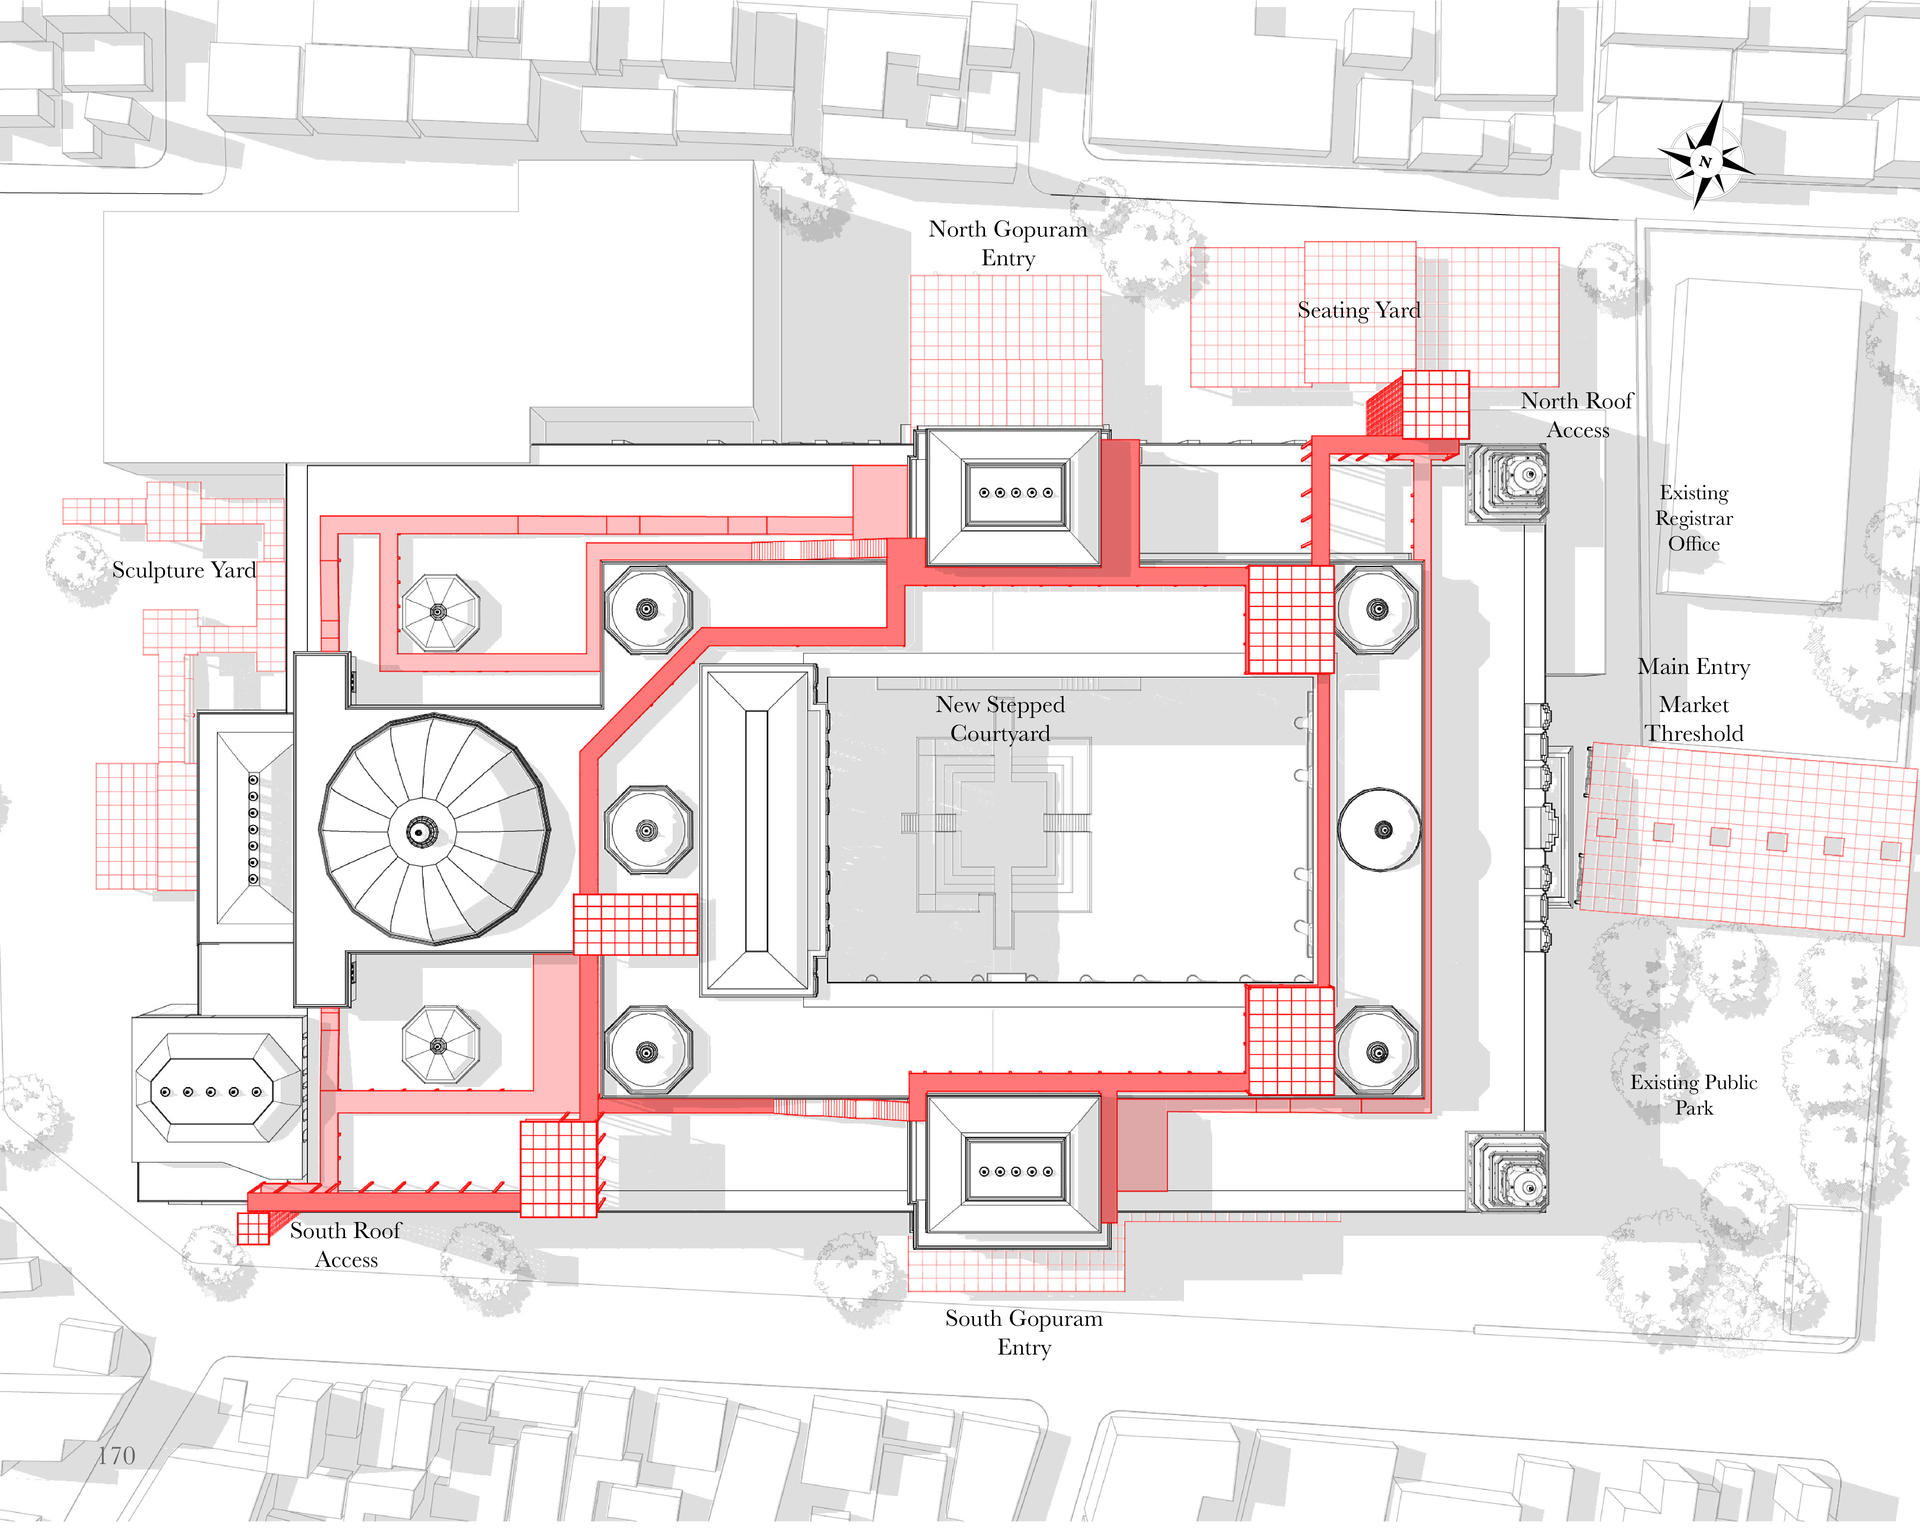 Site plan showing the threshold and roof interventions